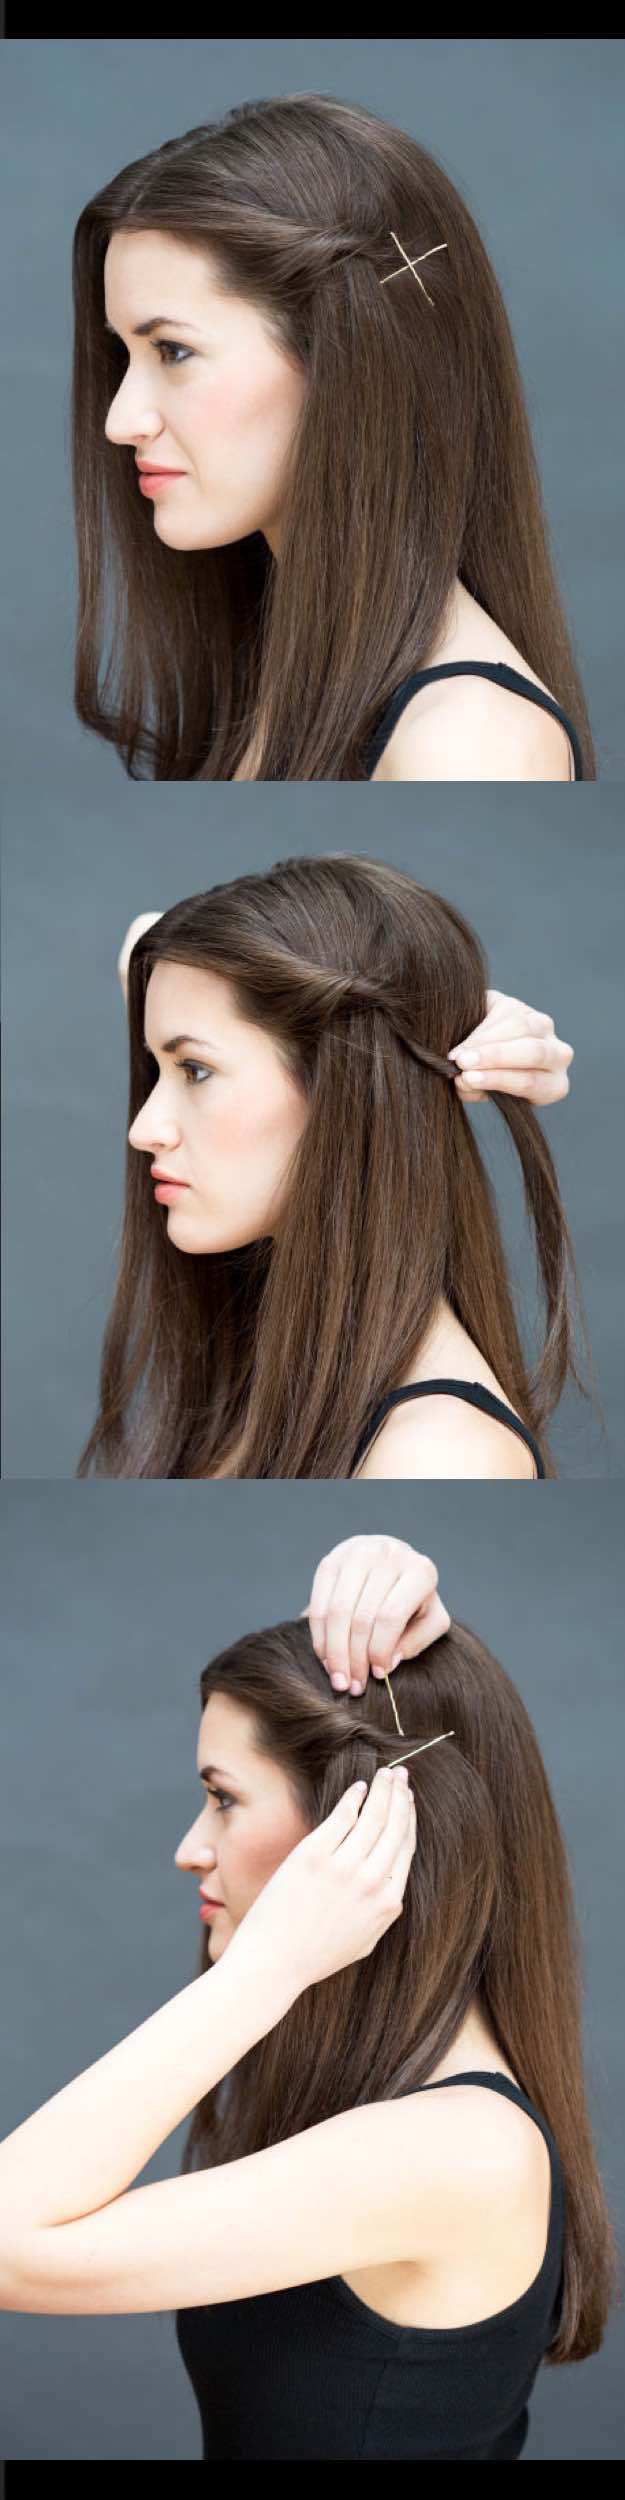 Quick Cute Hairstyles For Long Hair
 33 Quick and Easy Hairstyles for Straight Hair The Goddess